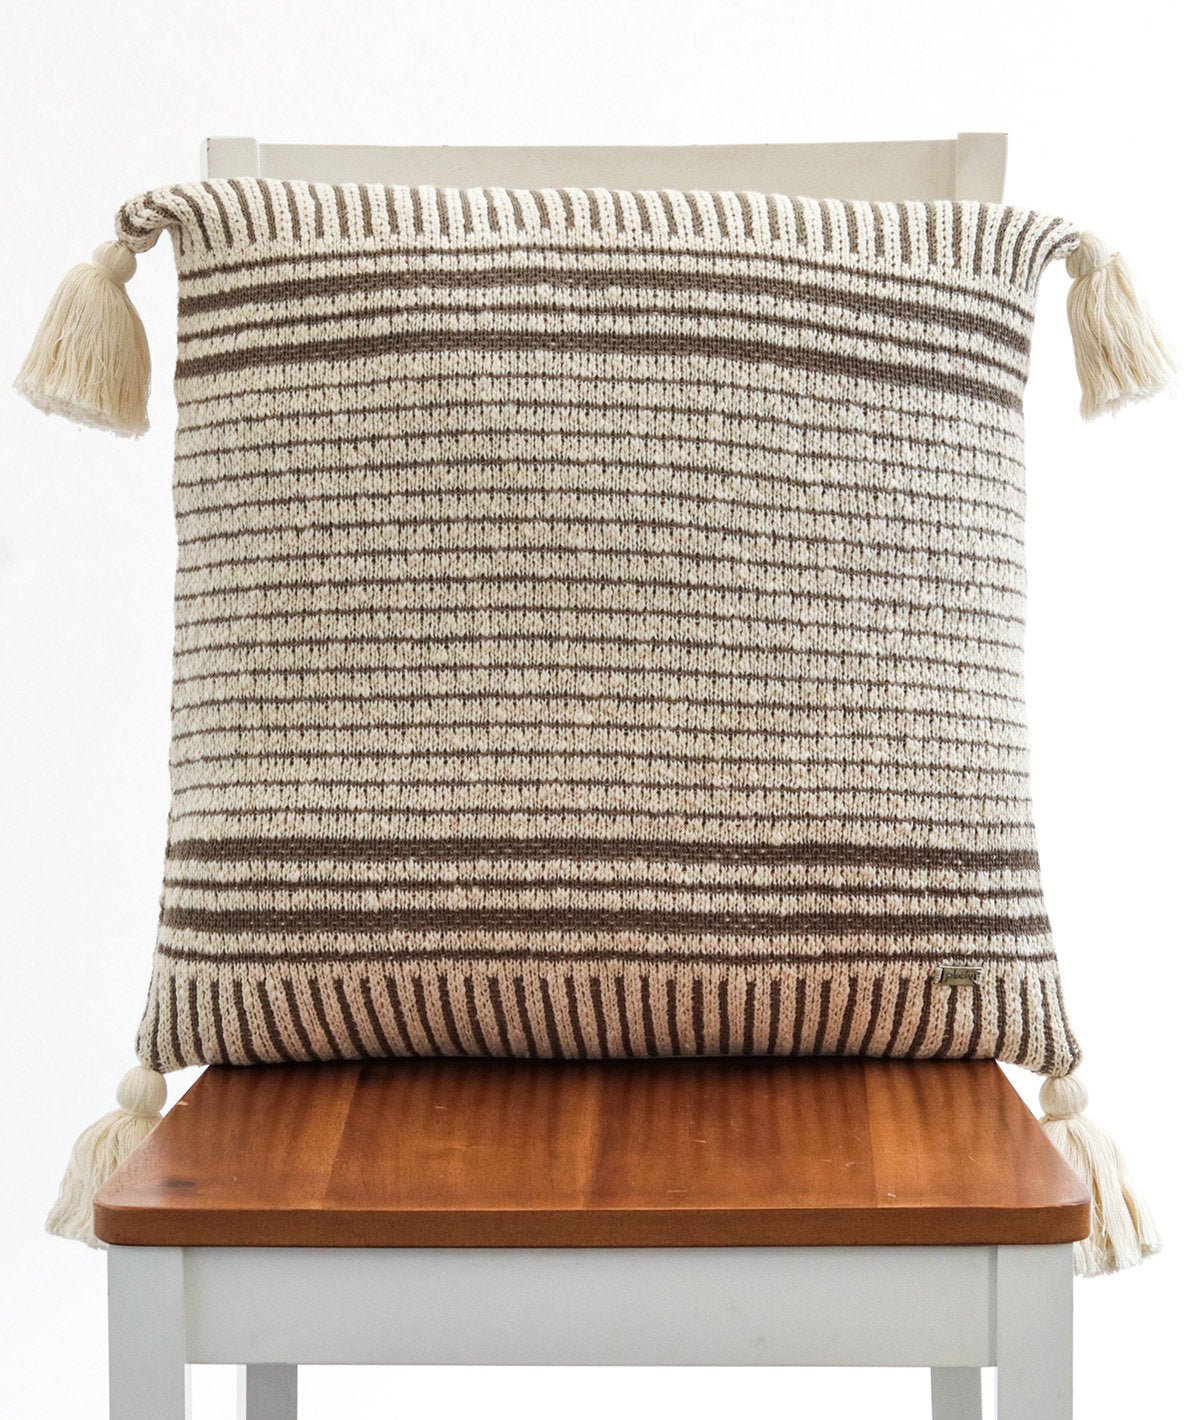 Stripe Square Cotton Knitted Decorative Grey & Natural Color 18 x 18 Inches Cushion Cover